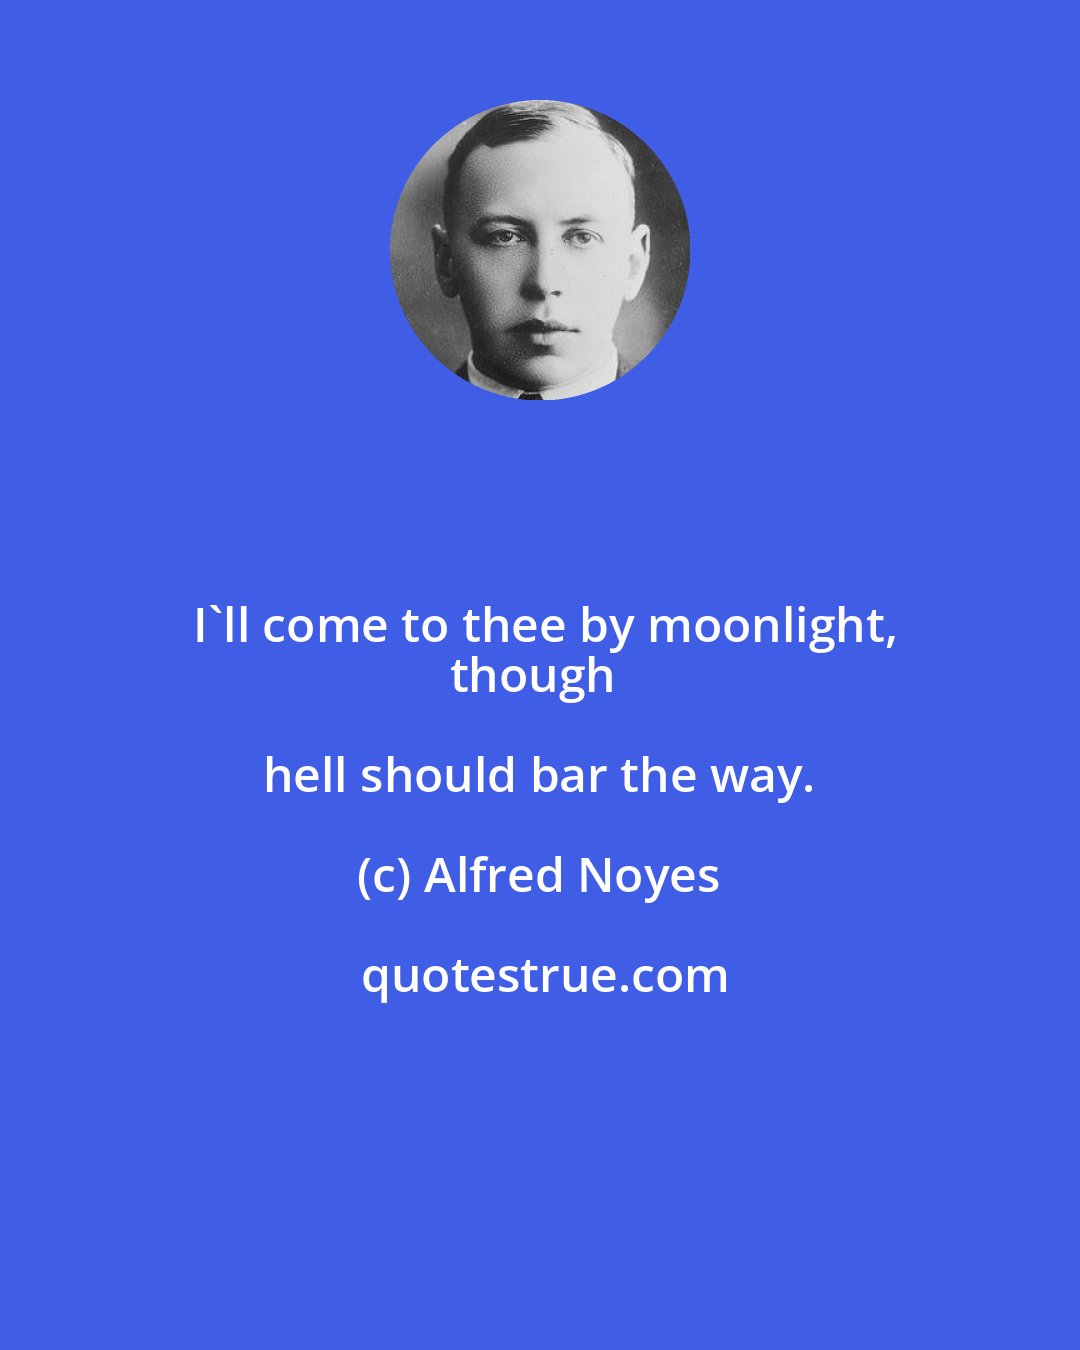 Alfred Noyes: I'll come to thee by moonlight,
though hell should bar the way.